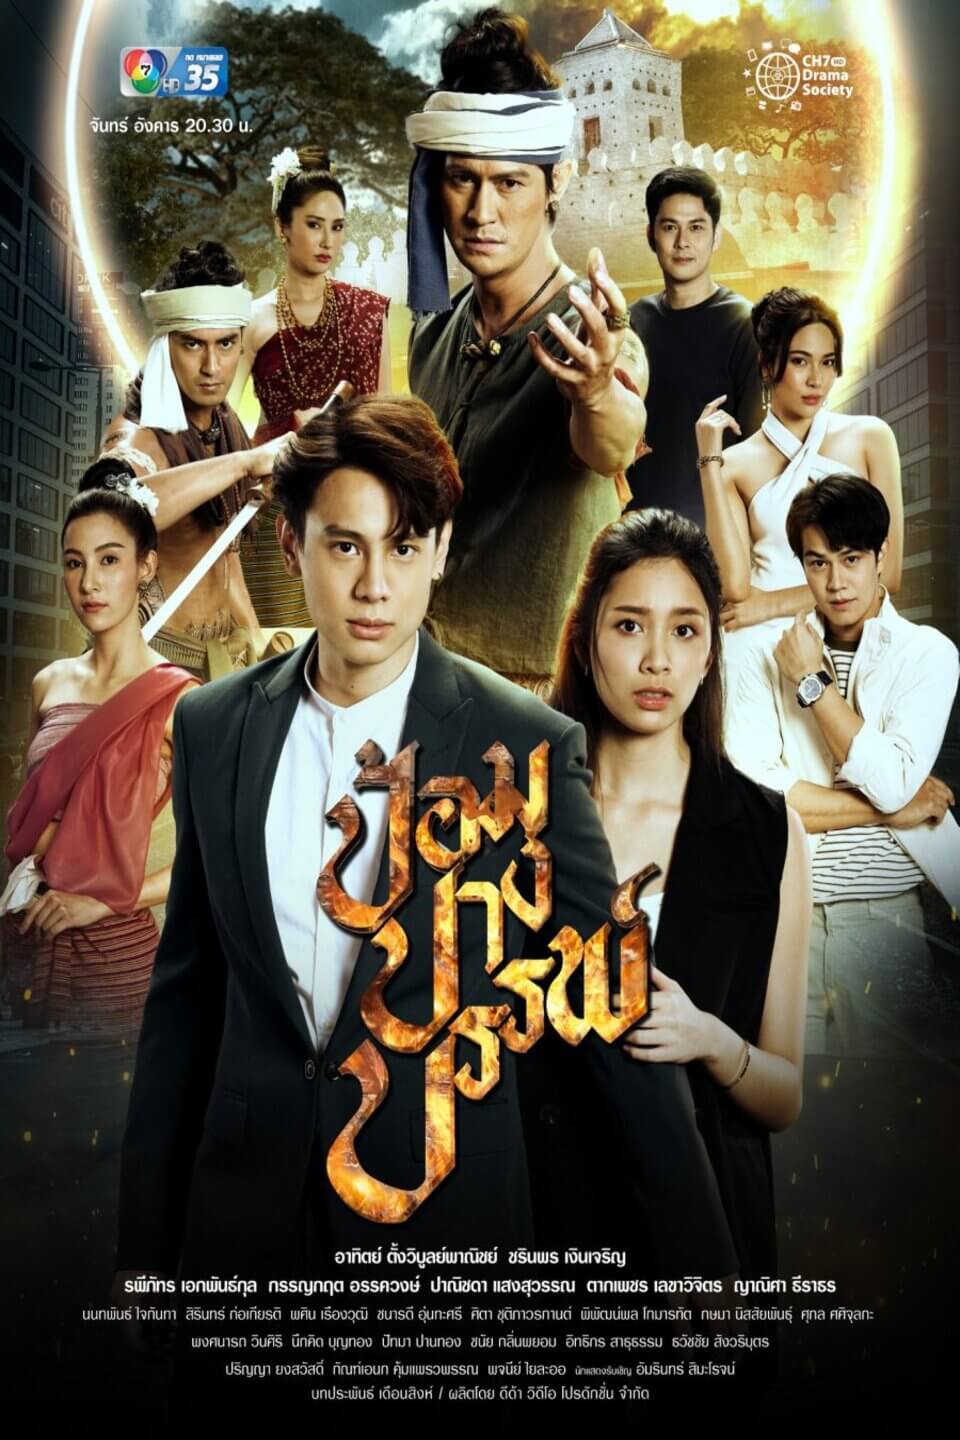 TV ratings for Pom Pang Ban (ป้อมปางบรรพ์) in Philippines. Channel 7 TV series